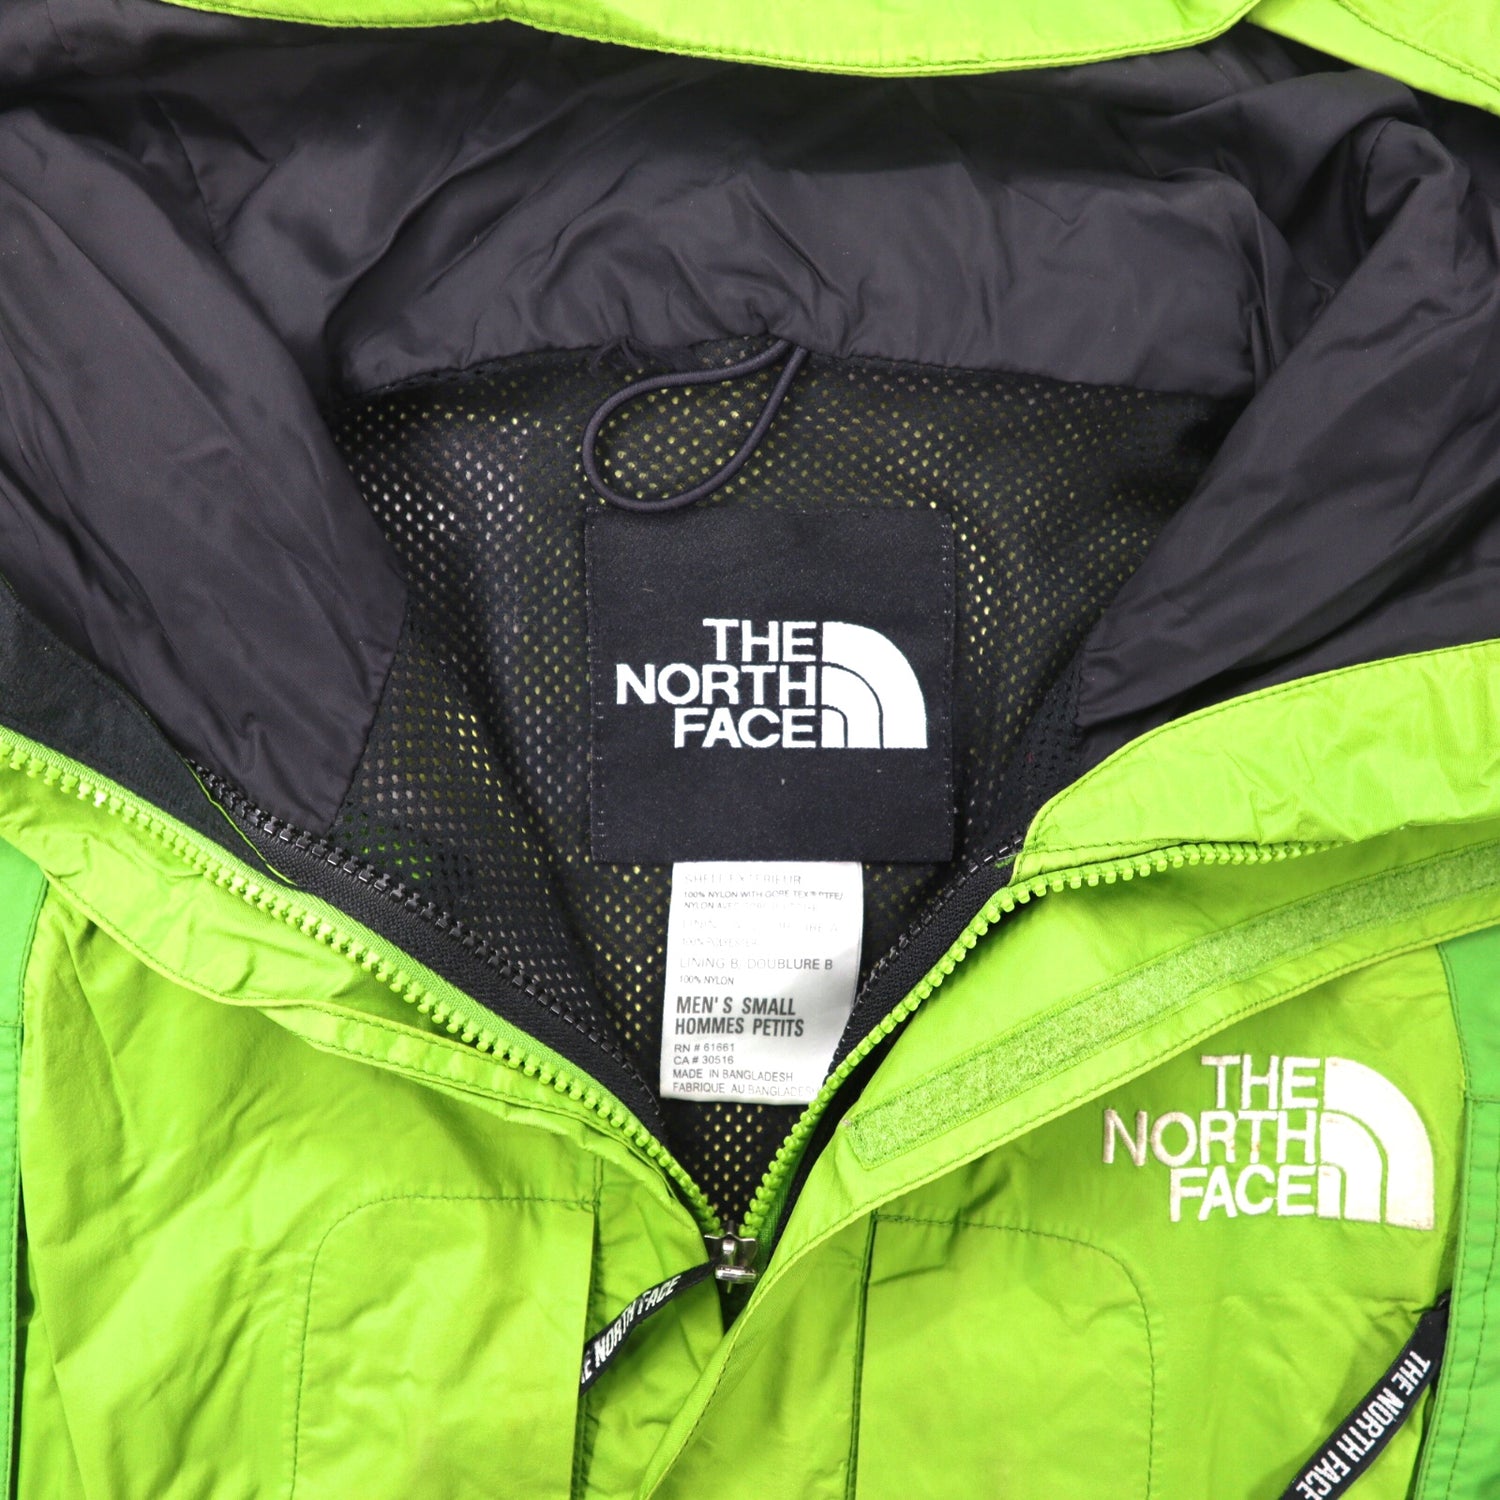 The North Face Mountain Parker S Green Gore-Tex – 日本然リトテ